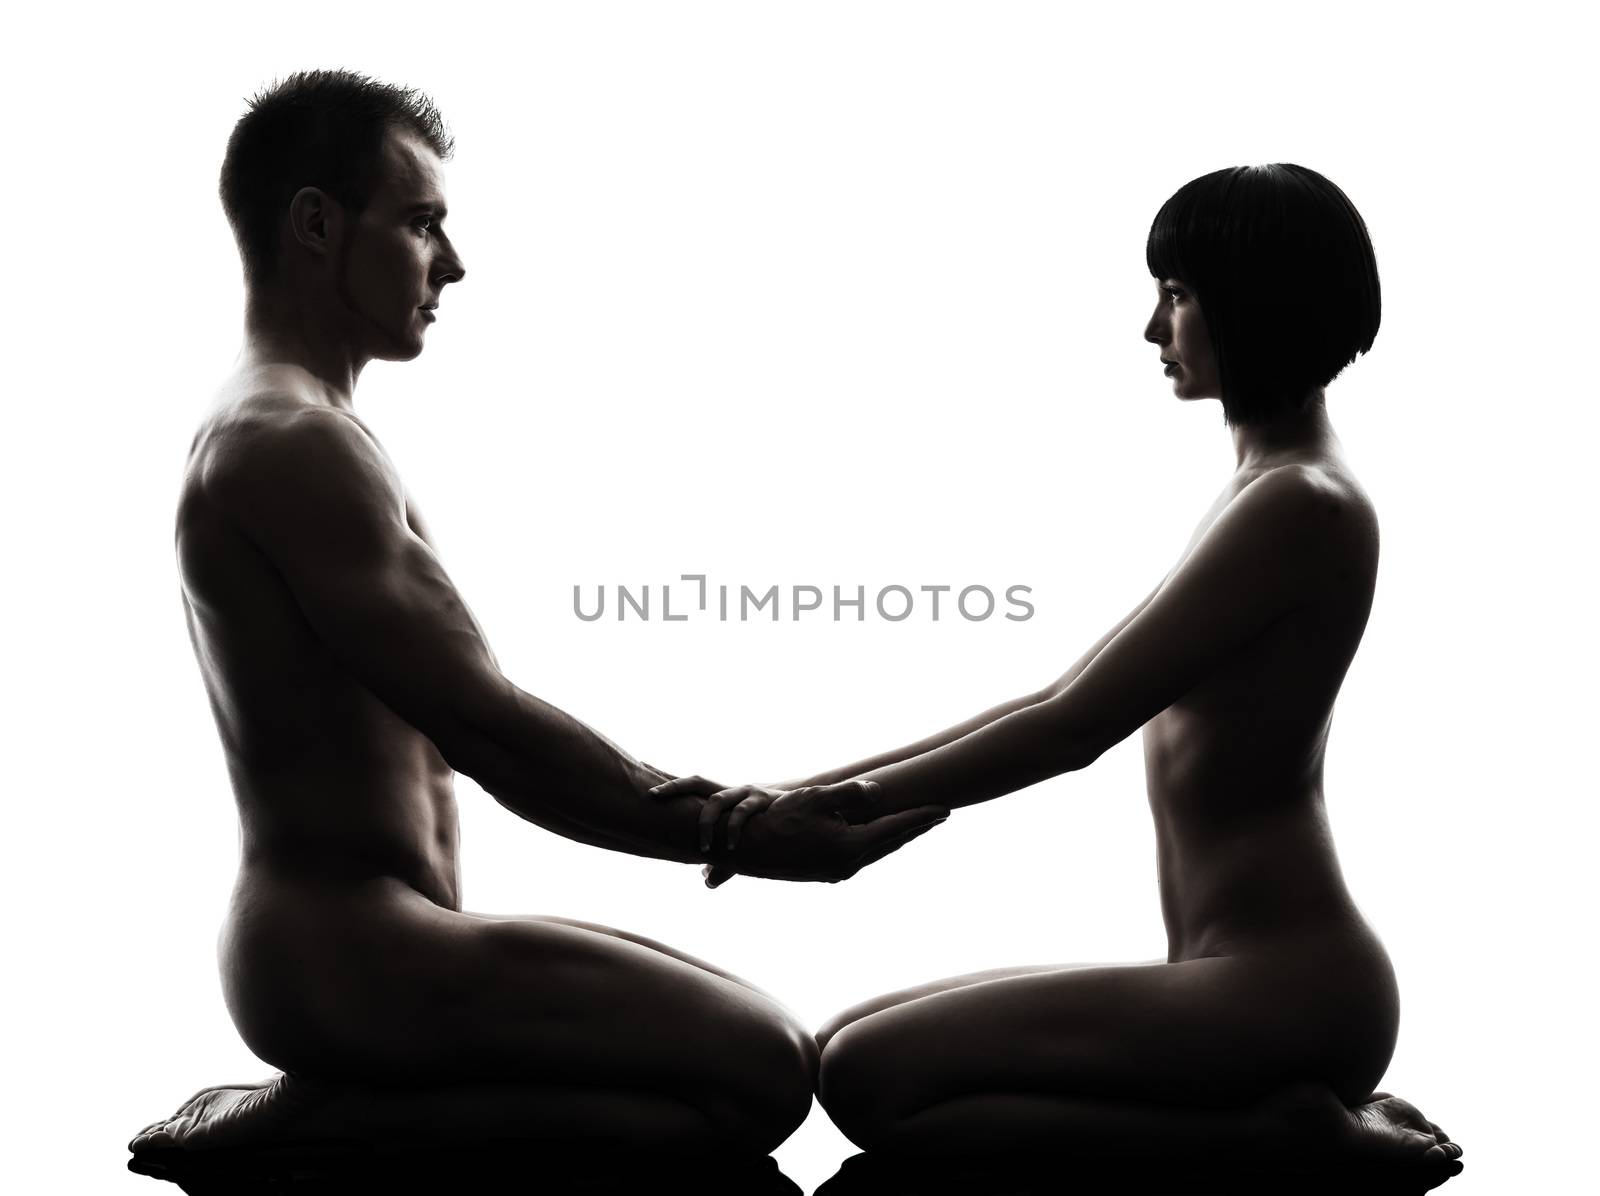 couple sexual kamasutra love activity silhouette by PIXSTILL